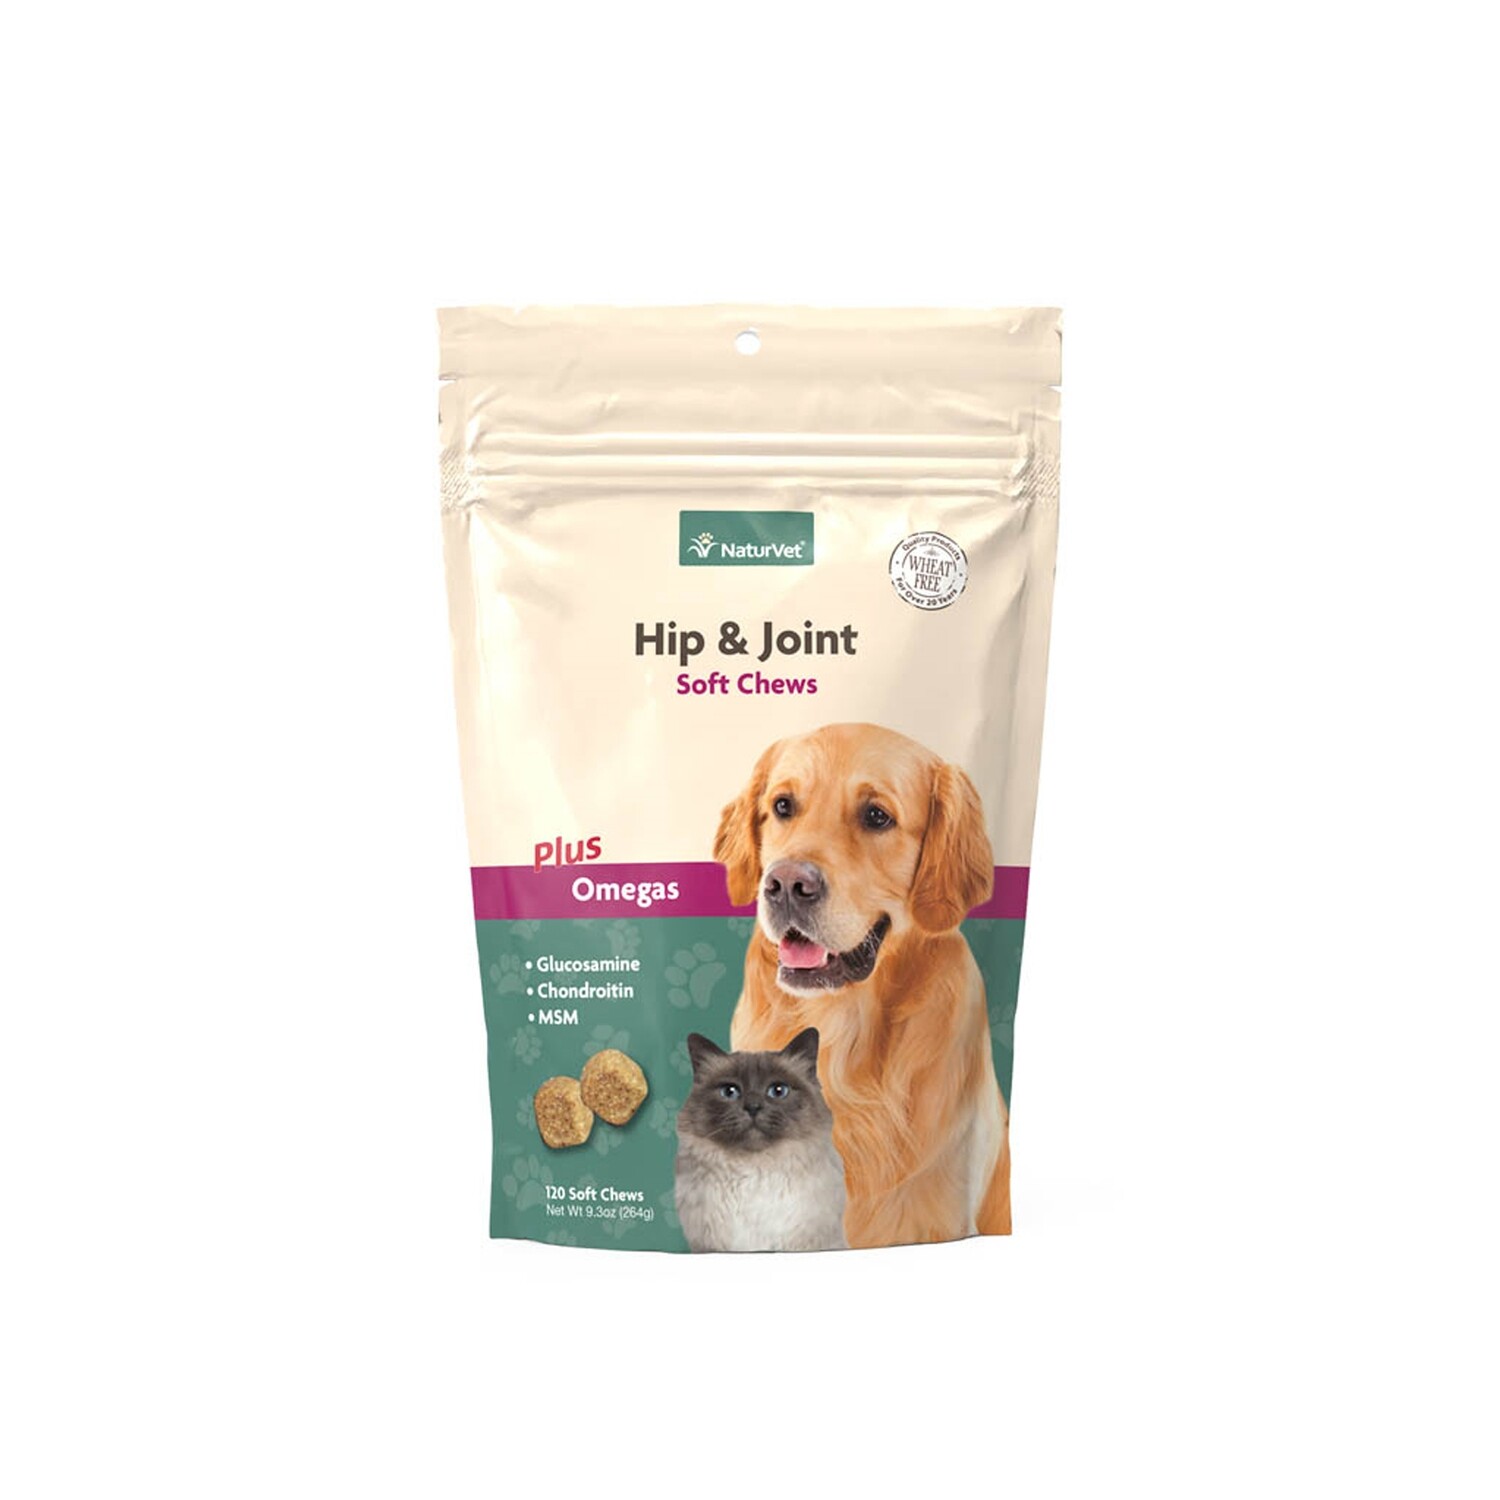 NATURVET® HIP & JOINT SOFT CHEWS for Cats and Dogs-120ct